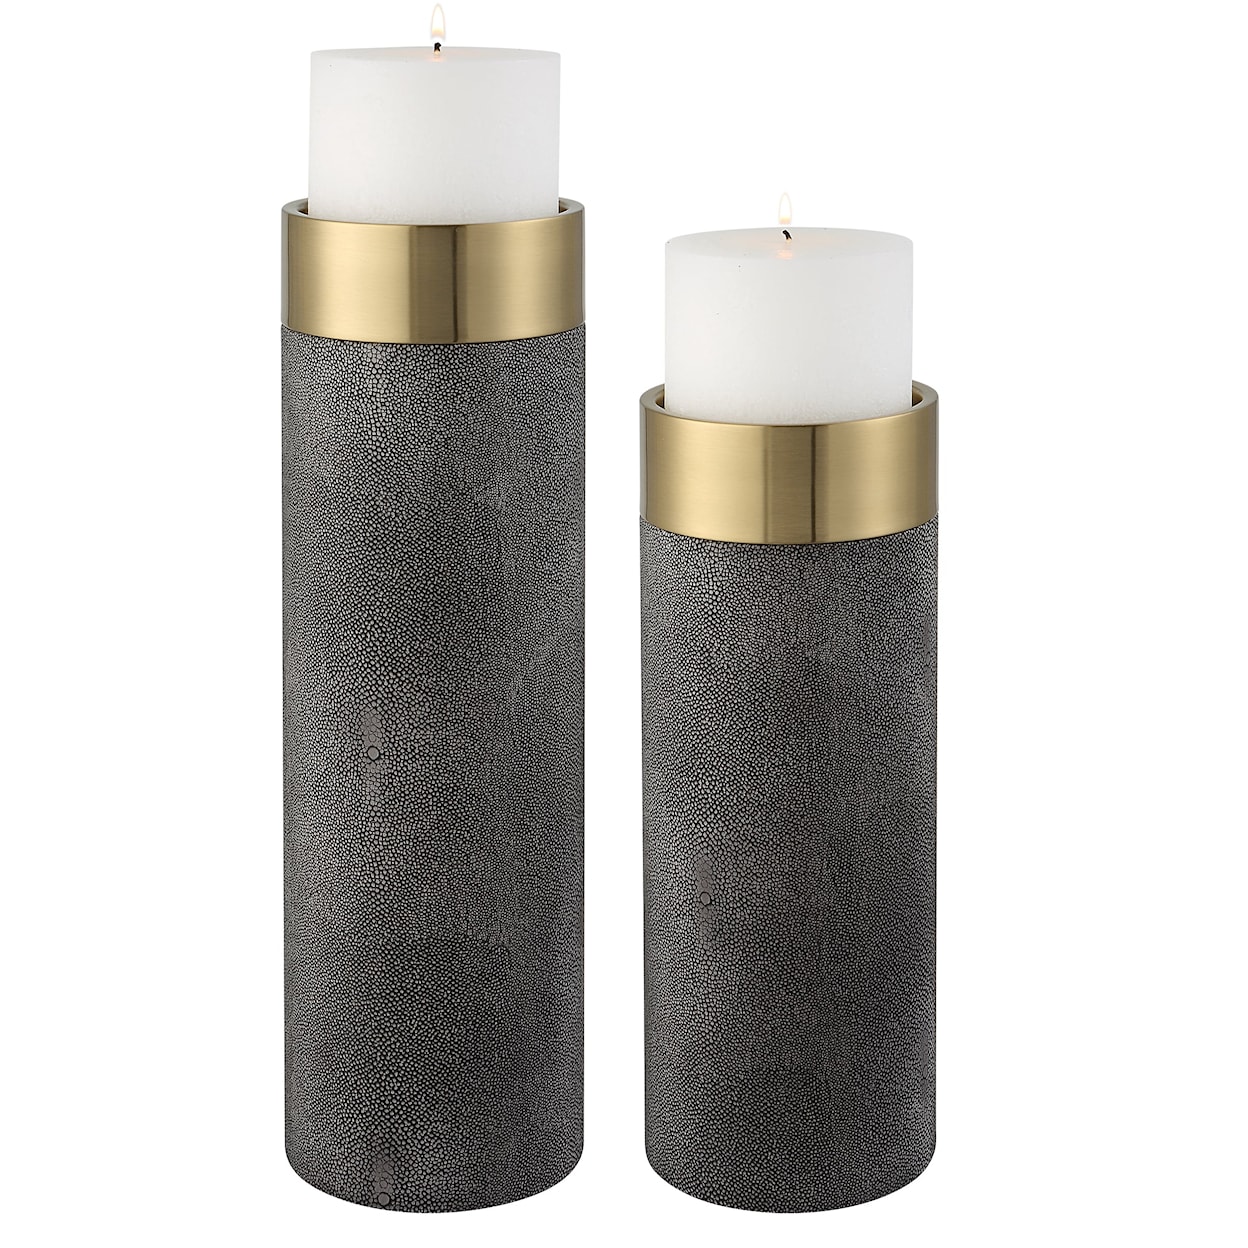 Uttermost Wessex Faux Shagreen Candleholders- Set of 2